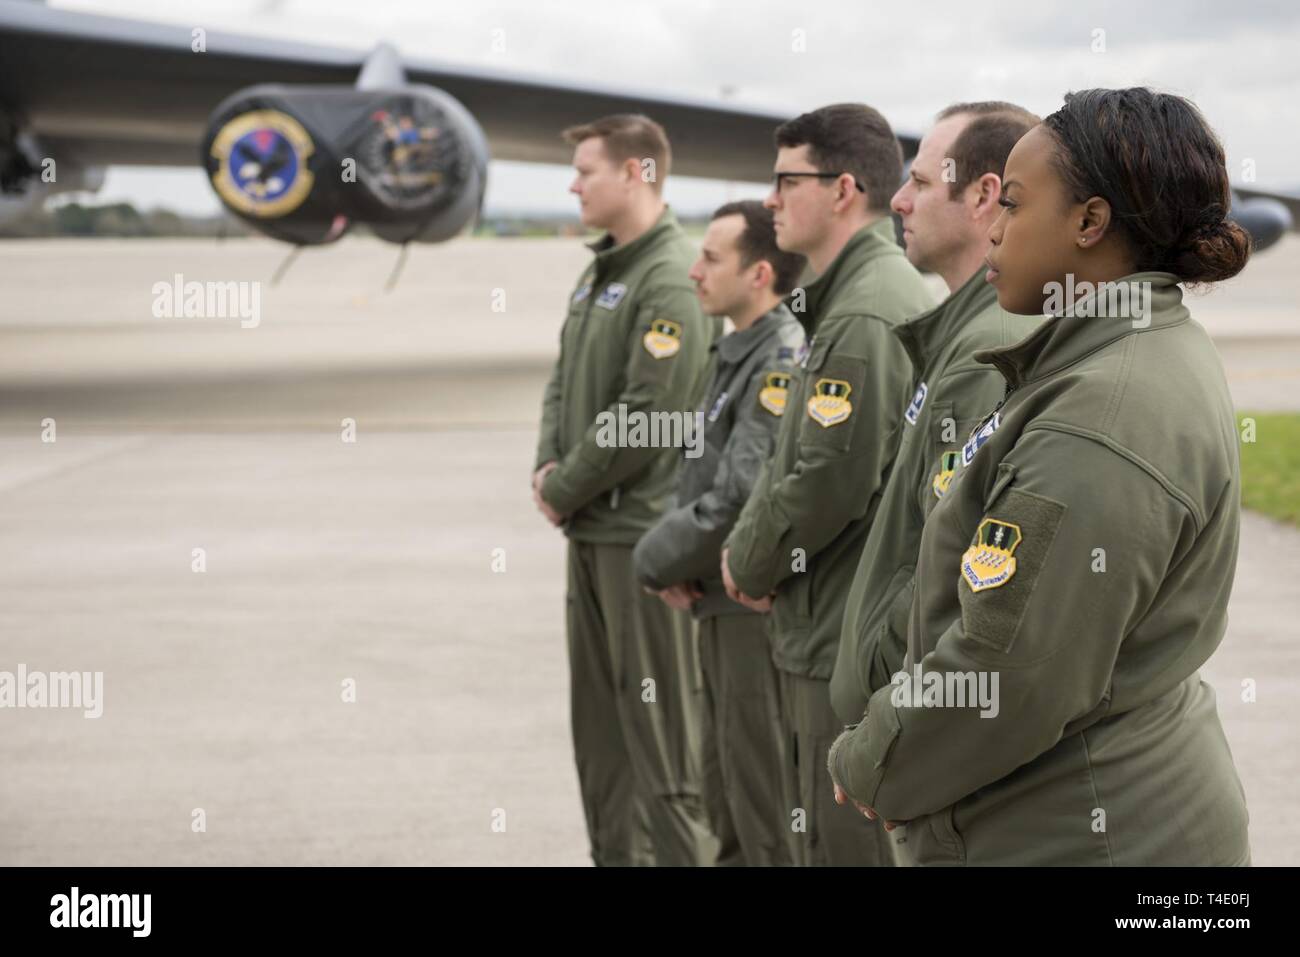 U.S. Air Force Capt. Austyn Wilson (right), 20th Bomb Squadron weapons system officer deployed from Barksdale Air Force Base, La., and other members of the 20th BS pose during a press conference at RAF Fairford, March 19, 2019, regarding a Bomber Task Force Europe deployment. The contingent of B-52 aircraft, Airmen and support equipment are currently deployed from the 2nd Bomb Wing, Barksdale Air Force Base, La., to support the BTF. The deployment of strategic bombers to the U.K. helps exercise RAF Fairford as U.S. Air Forces in Europe - Air Forces Africa’s forward-operating location for bombe Stock Photo